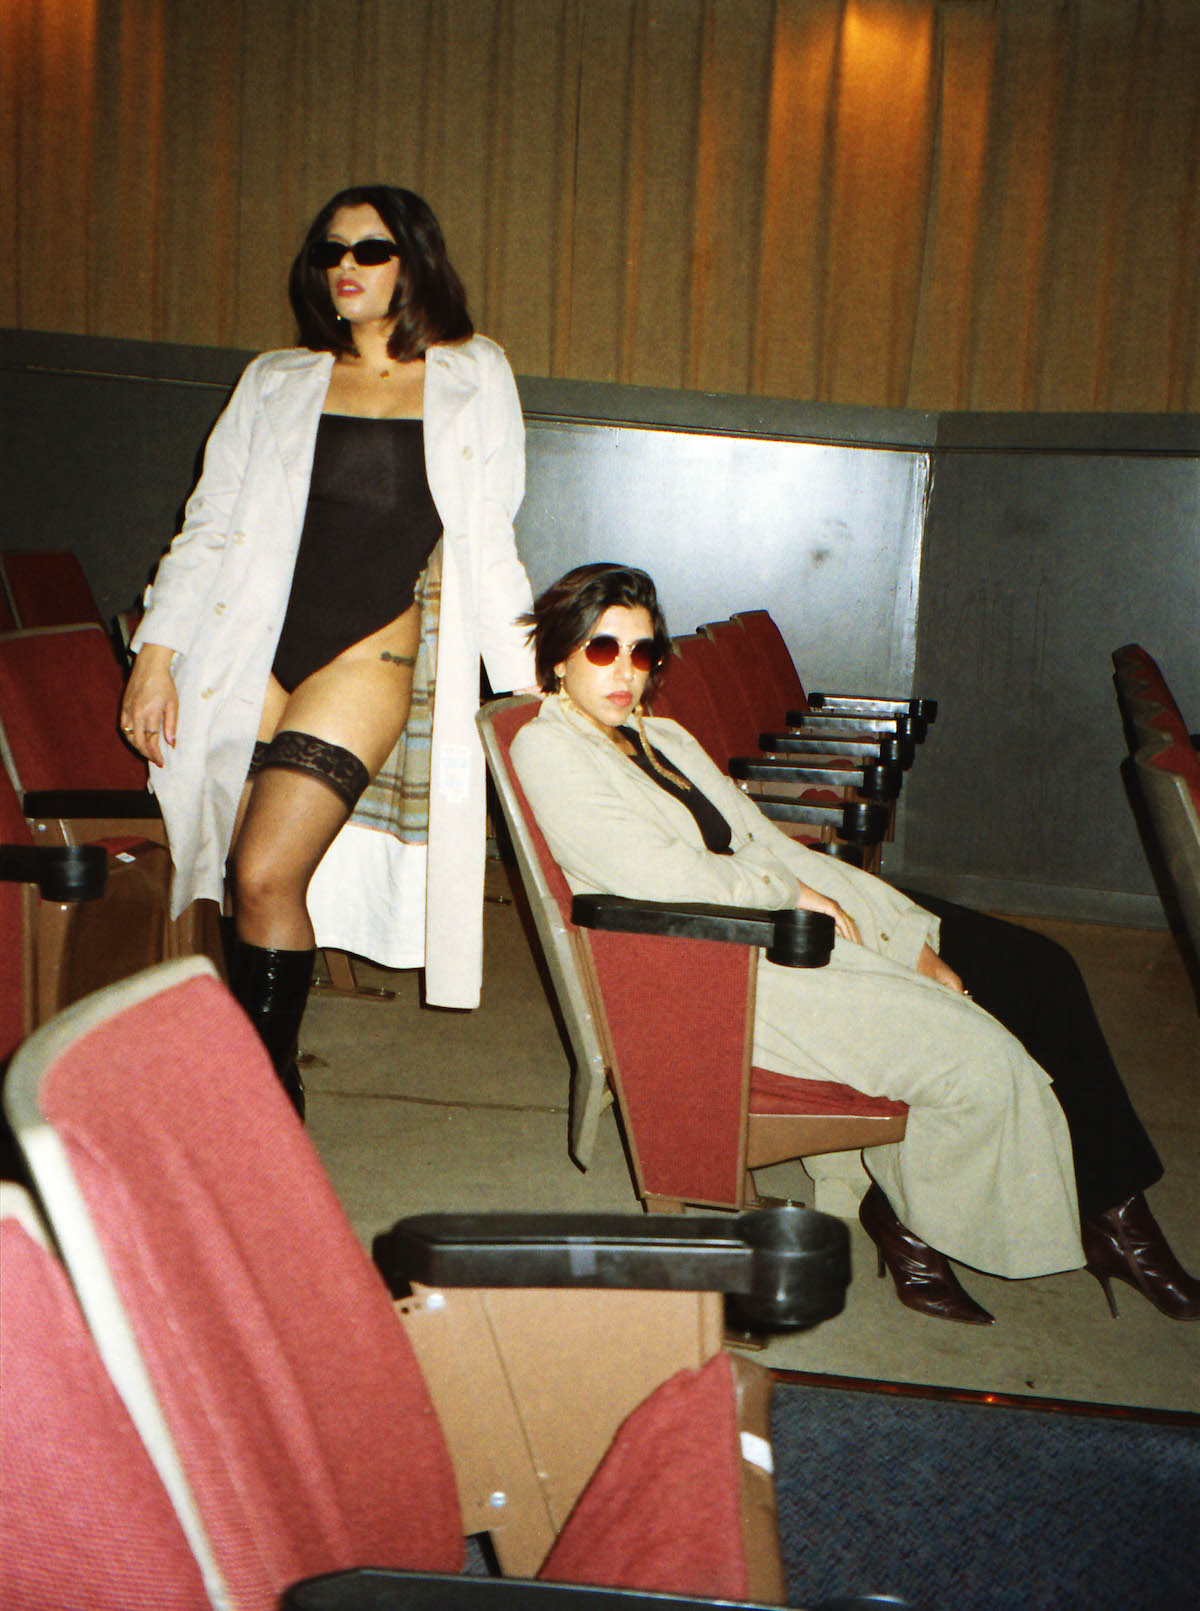 Two people with black hair in an old movie theatre, both wearing sunglasses. One of the two sits in a seat, this person wears black boots with spiked heels and a long sand-colored coat. The other is standing behind the seat, supporting herself with one hand on the backrest. This person is wearing a black bodysuit, black sheer overknee stockings with lace, black boots and a white coat.